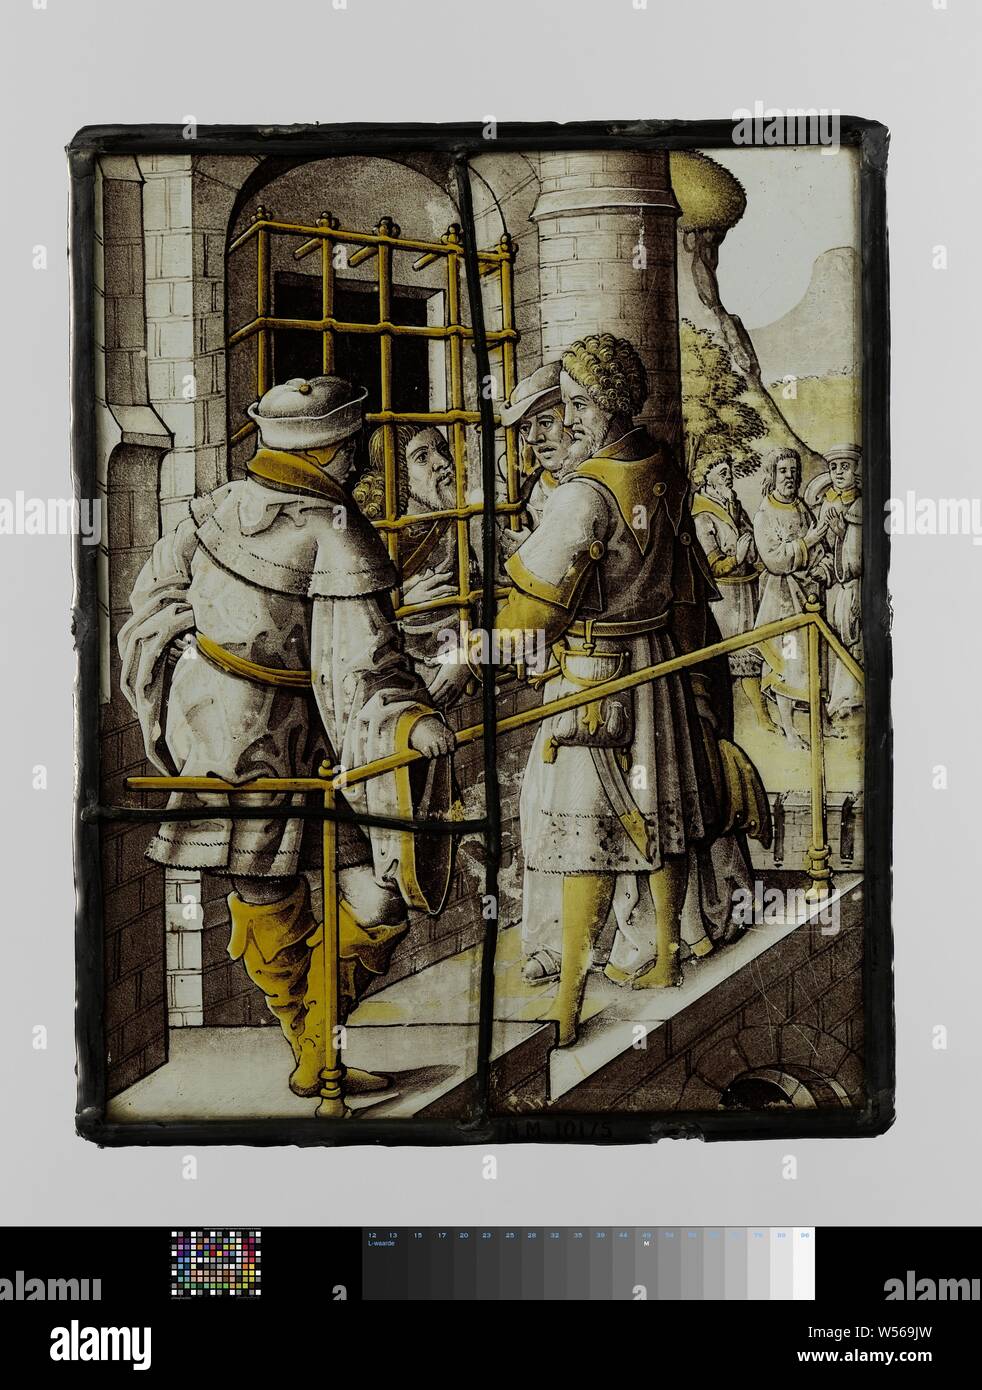 Windowpane with a visit to John the Baptist in prison, Windowpane with figures, one behind bars. Three people are talking to a prisoner. Three more people are on the horizon., anonymous, Northern Netherlands, c. 1500 - c. 1550, glass, silver stain, h 23 cm × w 18.5 cm Stock Photo